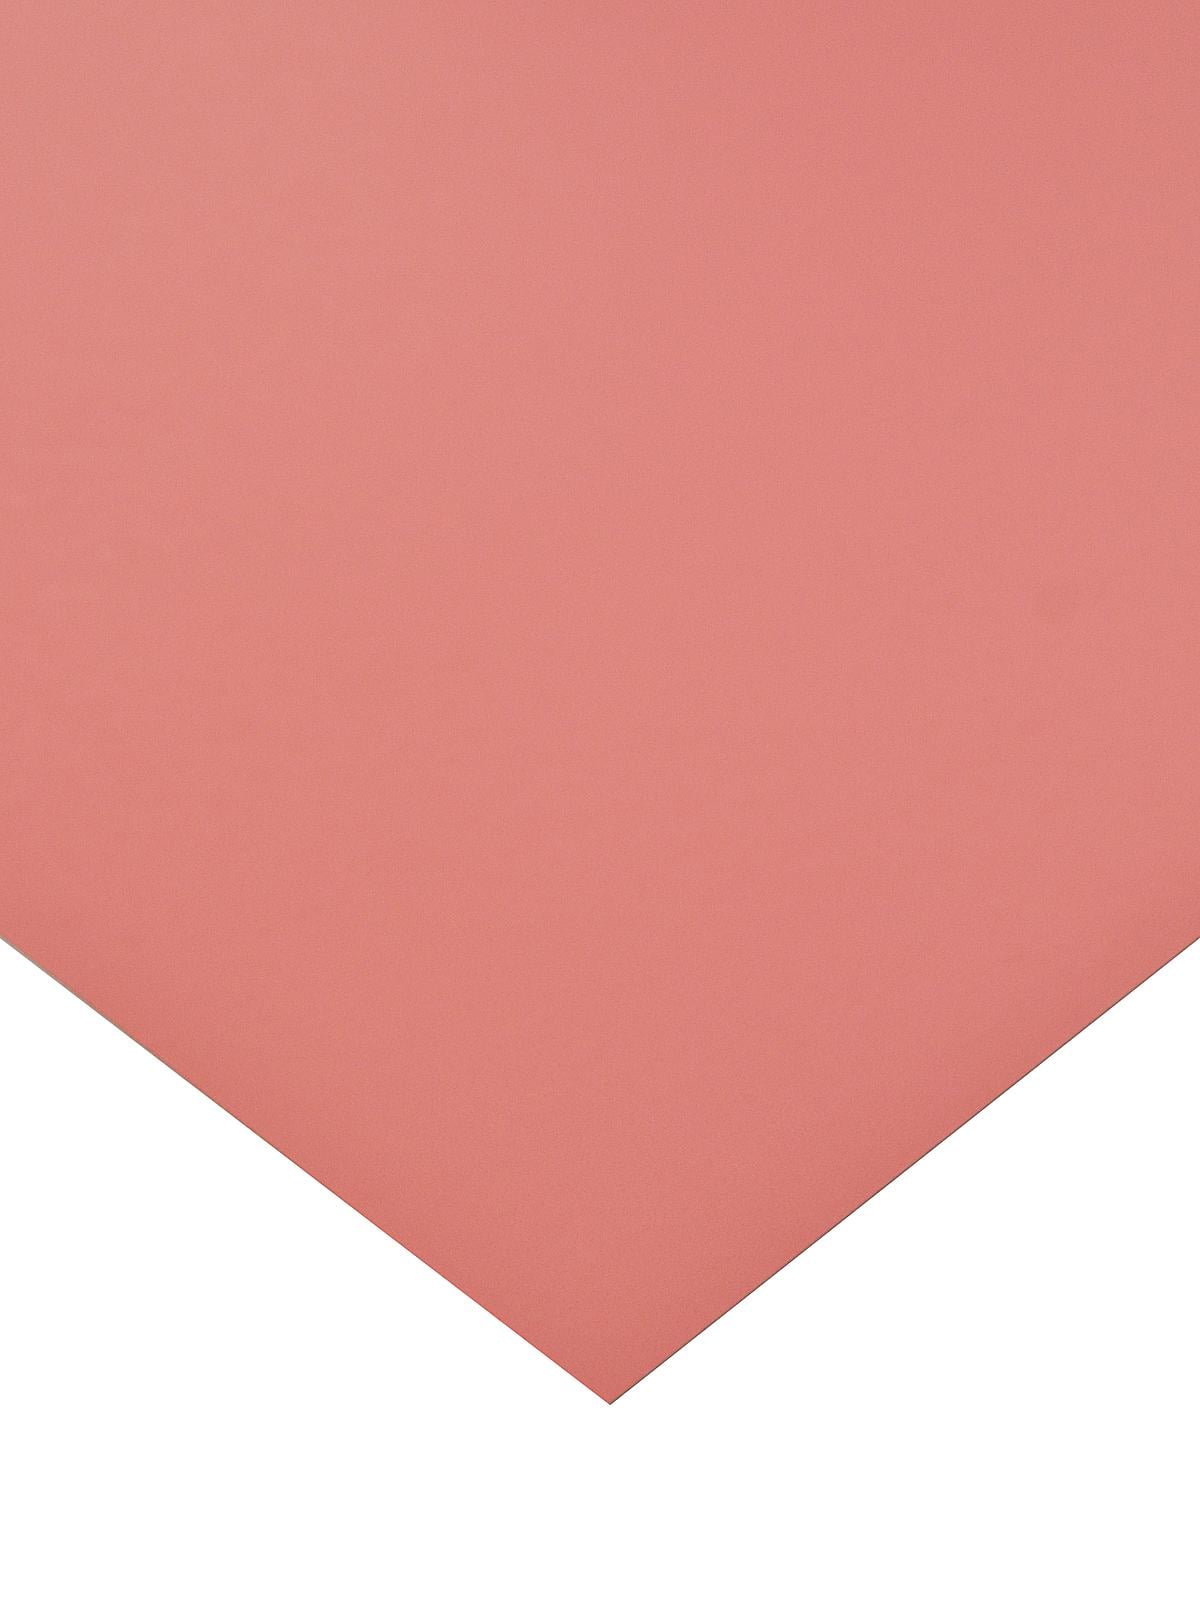 The Heavy Poster Board red (pack of 25)